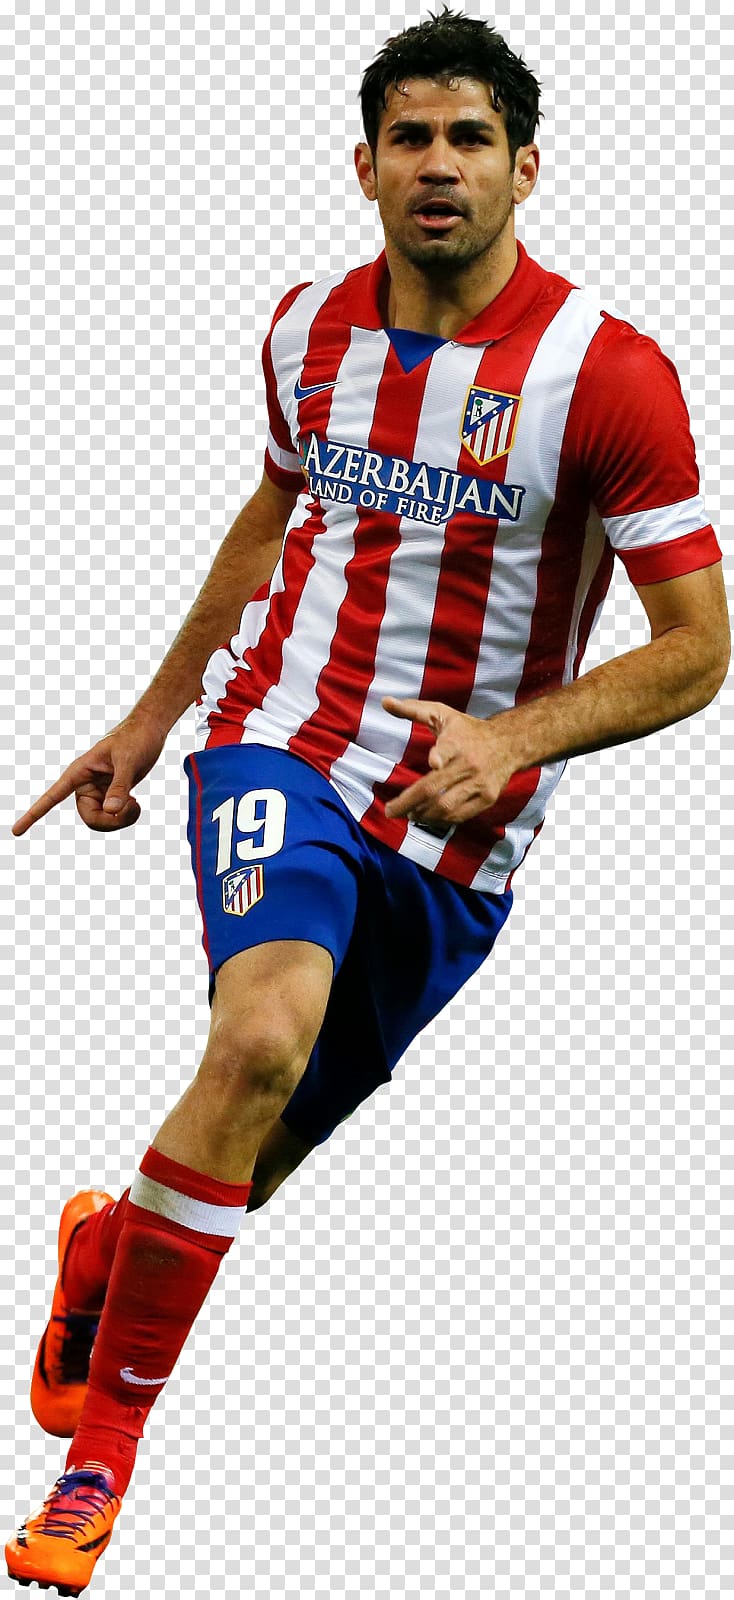 Diego Costa Atlético Madrid Real Madrid C.F. Chelsea F.C. Football player, Diego Costa transparent background PNG clipart